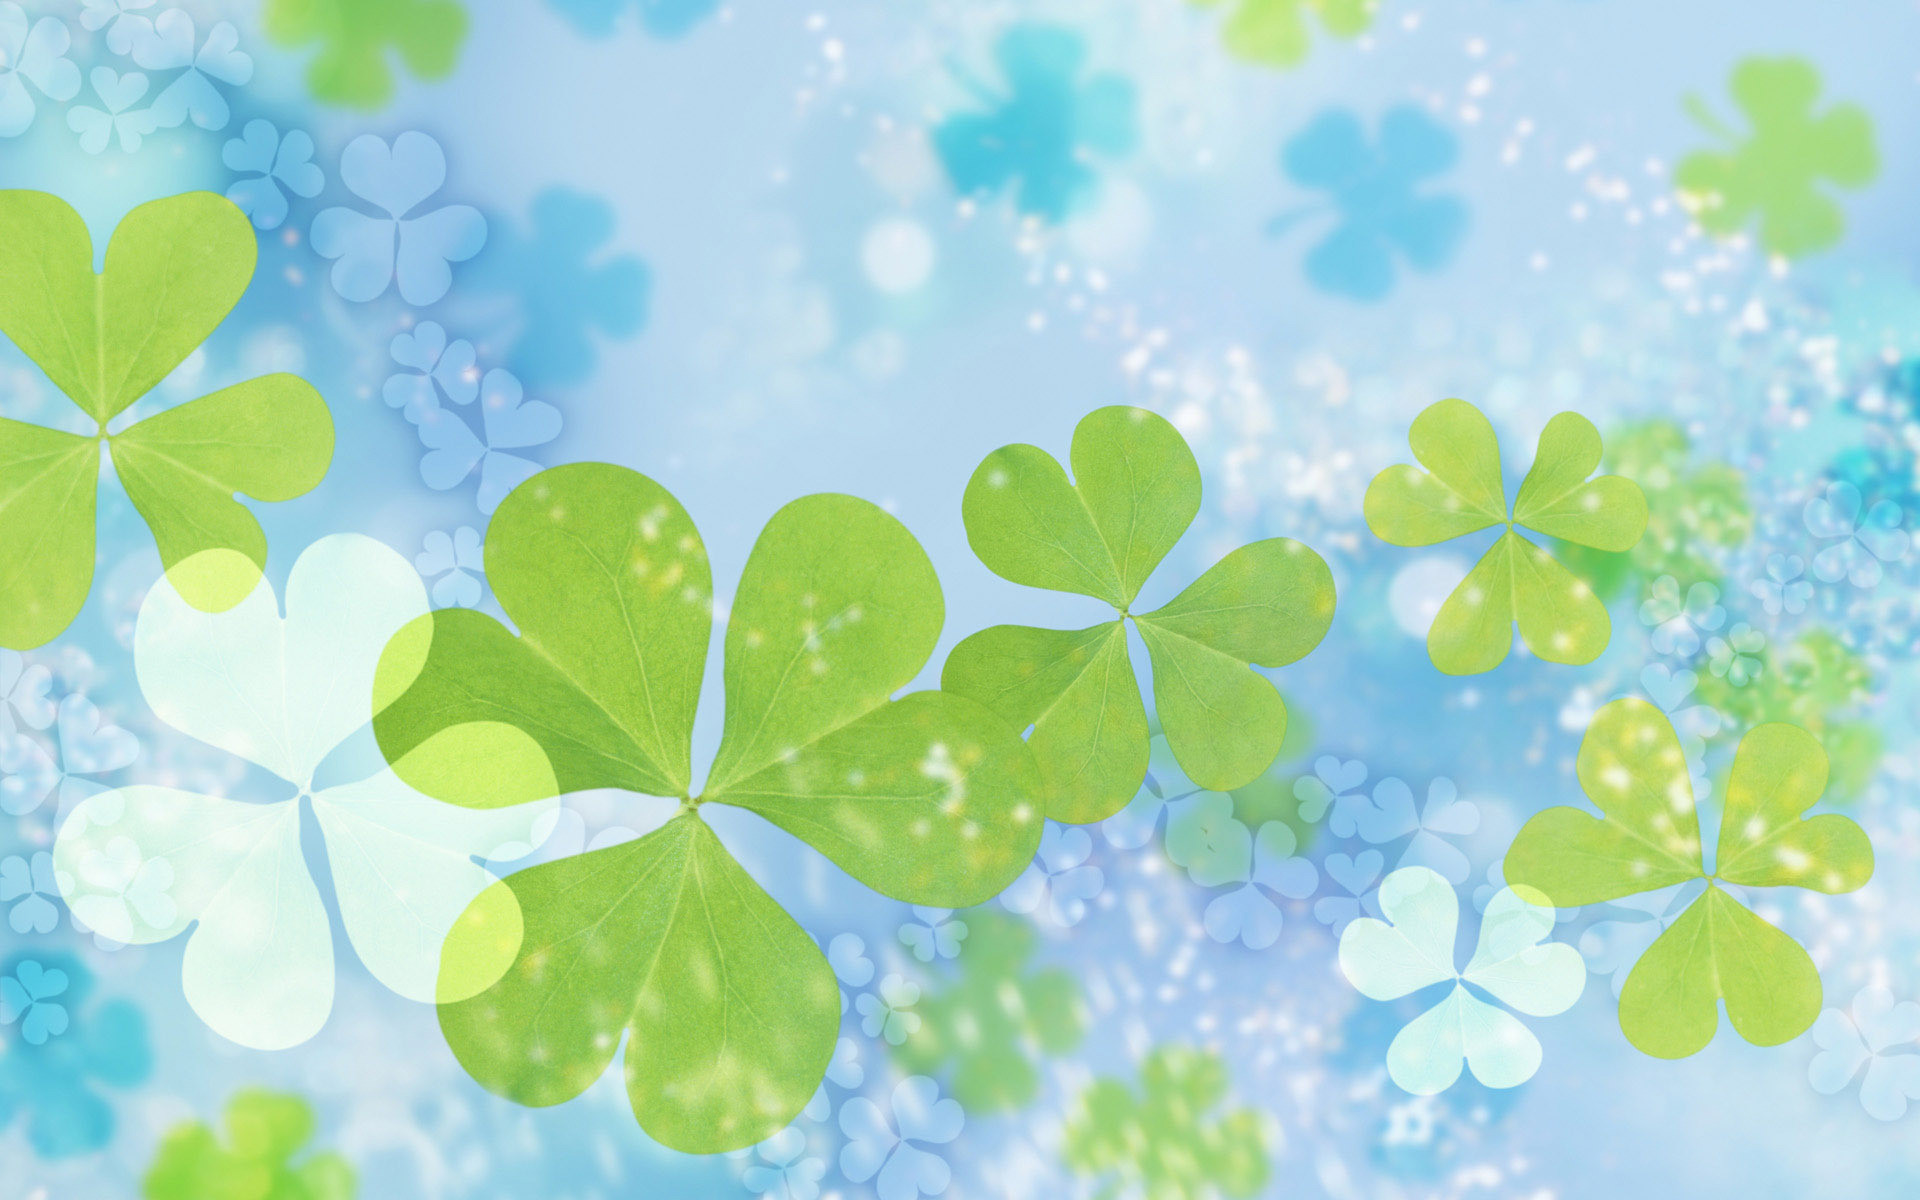 1920x1200 Saint Patrick s Day Wallpapers Wallpaper High Definition High 